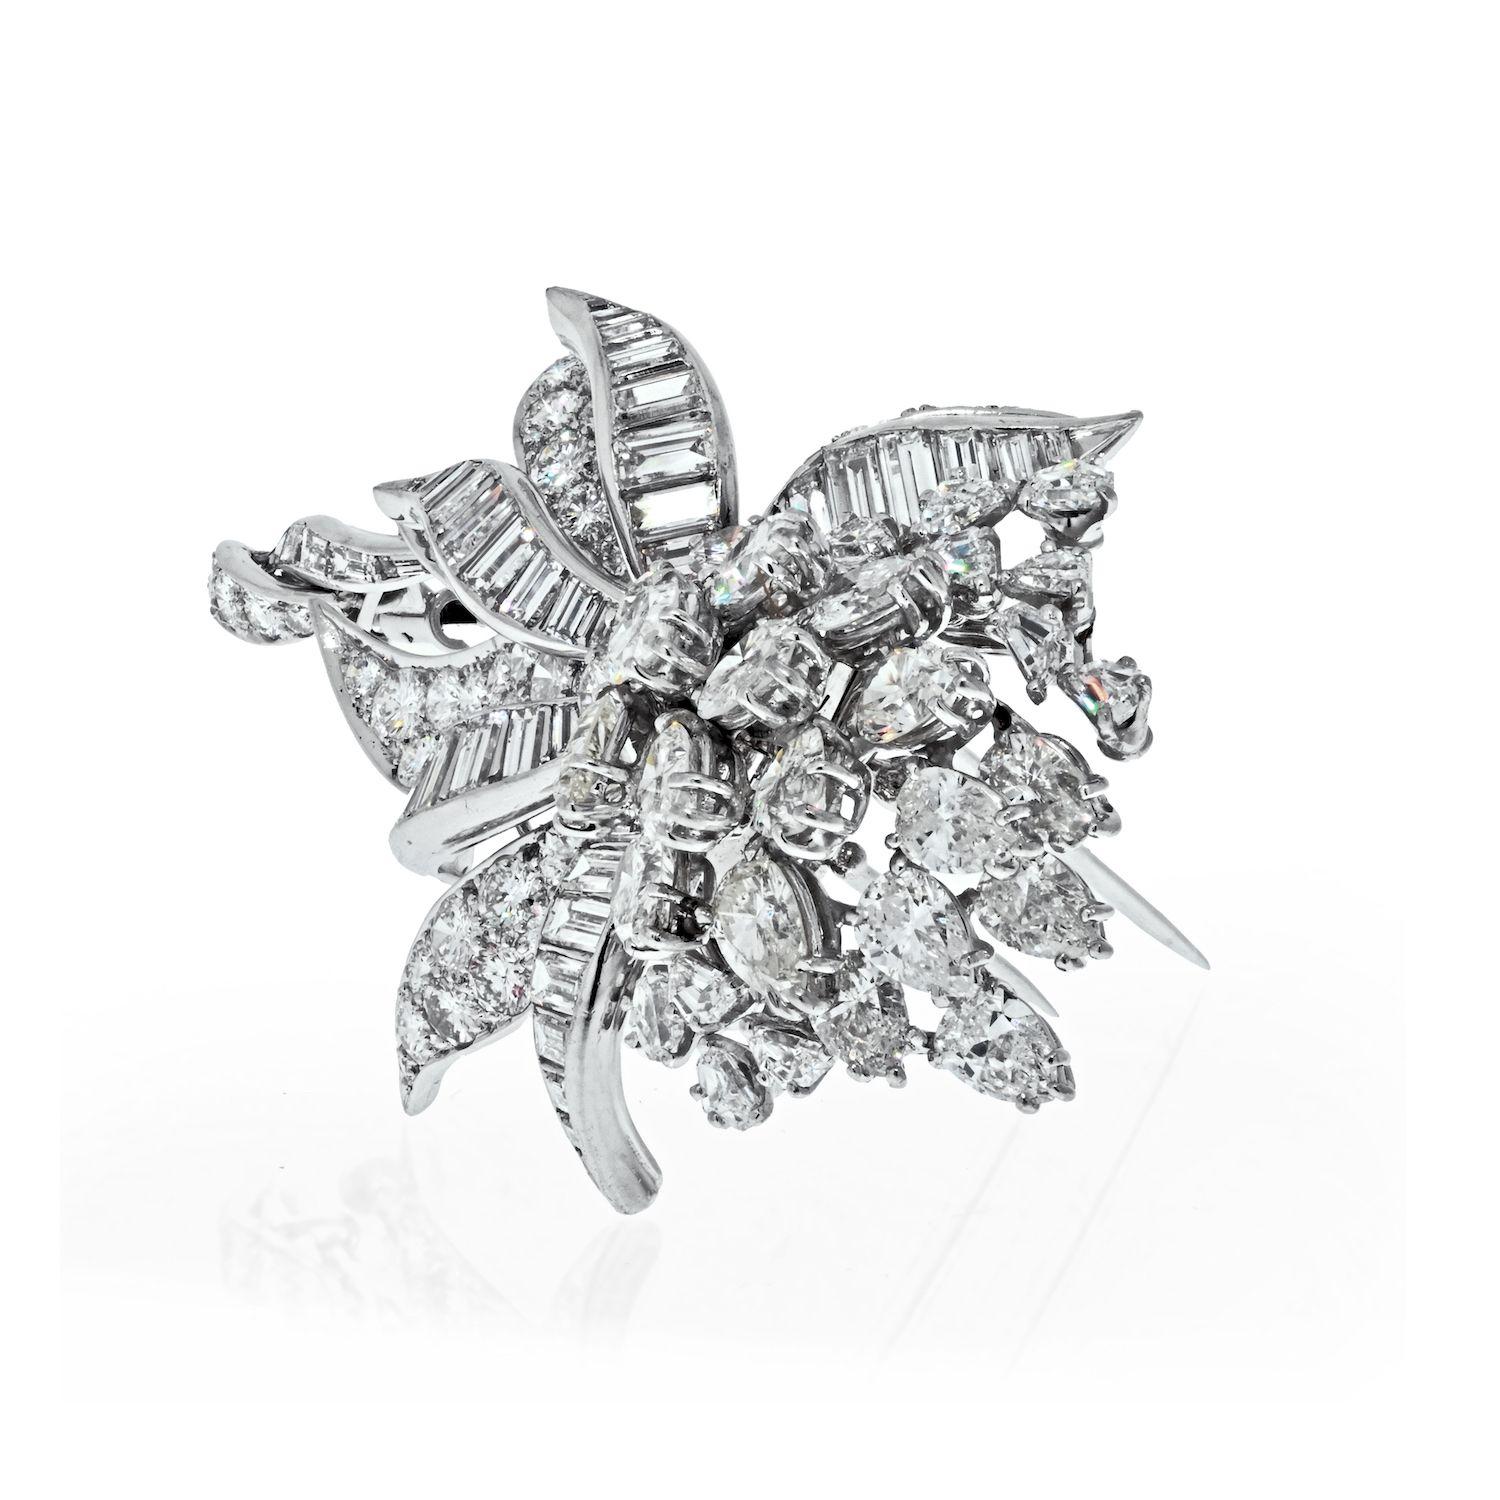 Beautiful diamond brooch by David Webb crafted in Platinum, set with lots of mixed cut diamonds: from round brilliant cuts, pear cuts to baguette cut diamonds. 21 carats of sparkly diamonds make it a perfect brooch to gift to your loved one. 
Circa